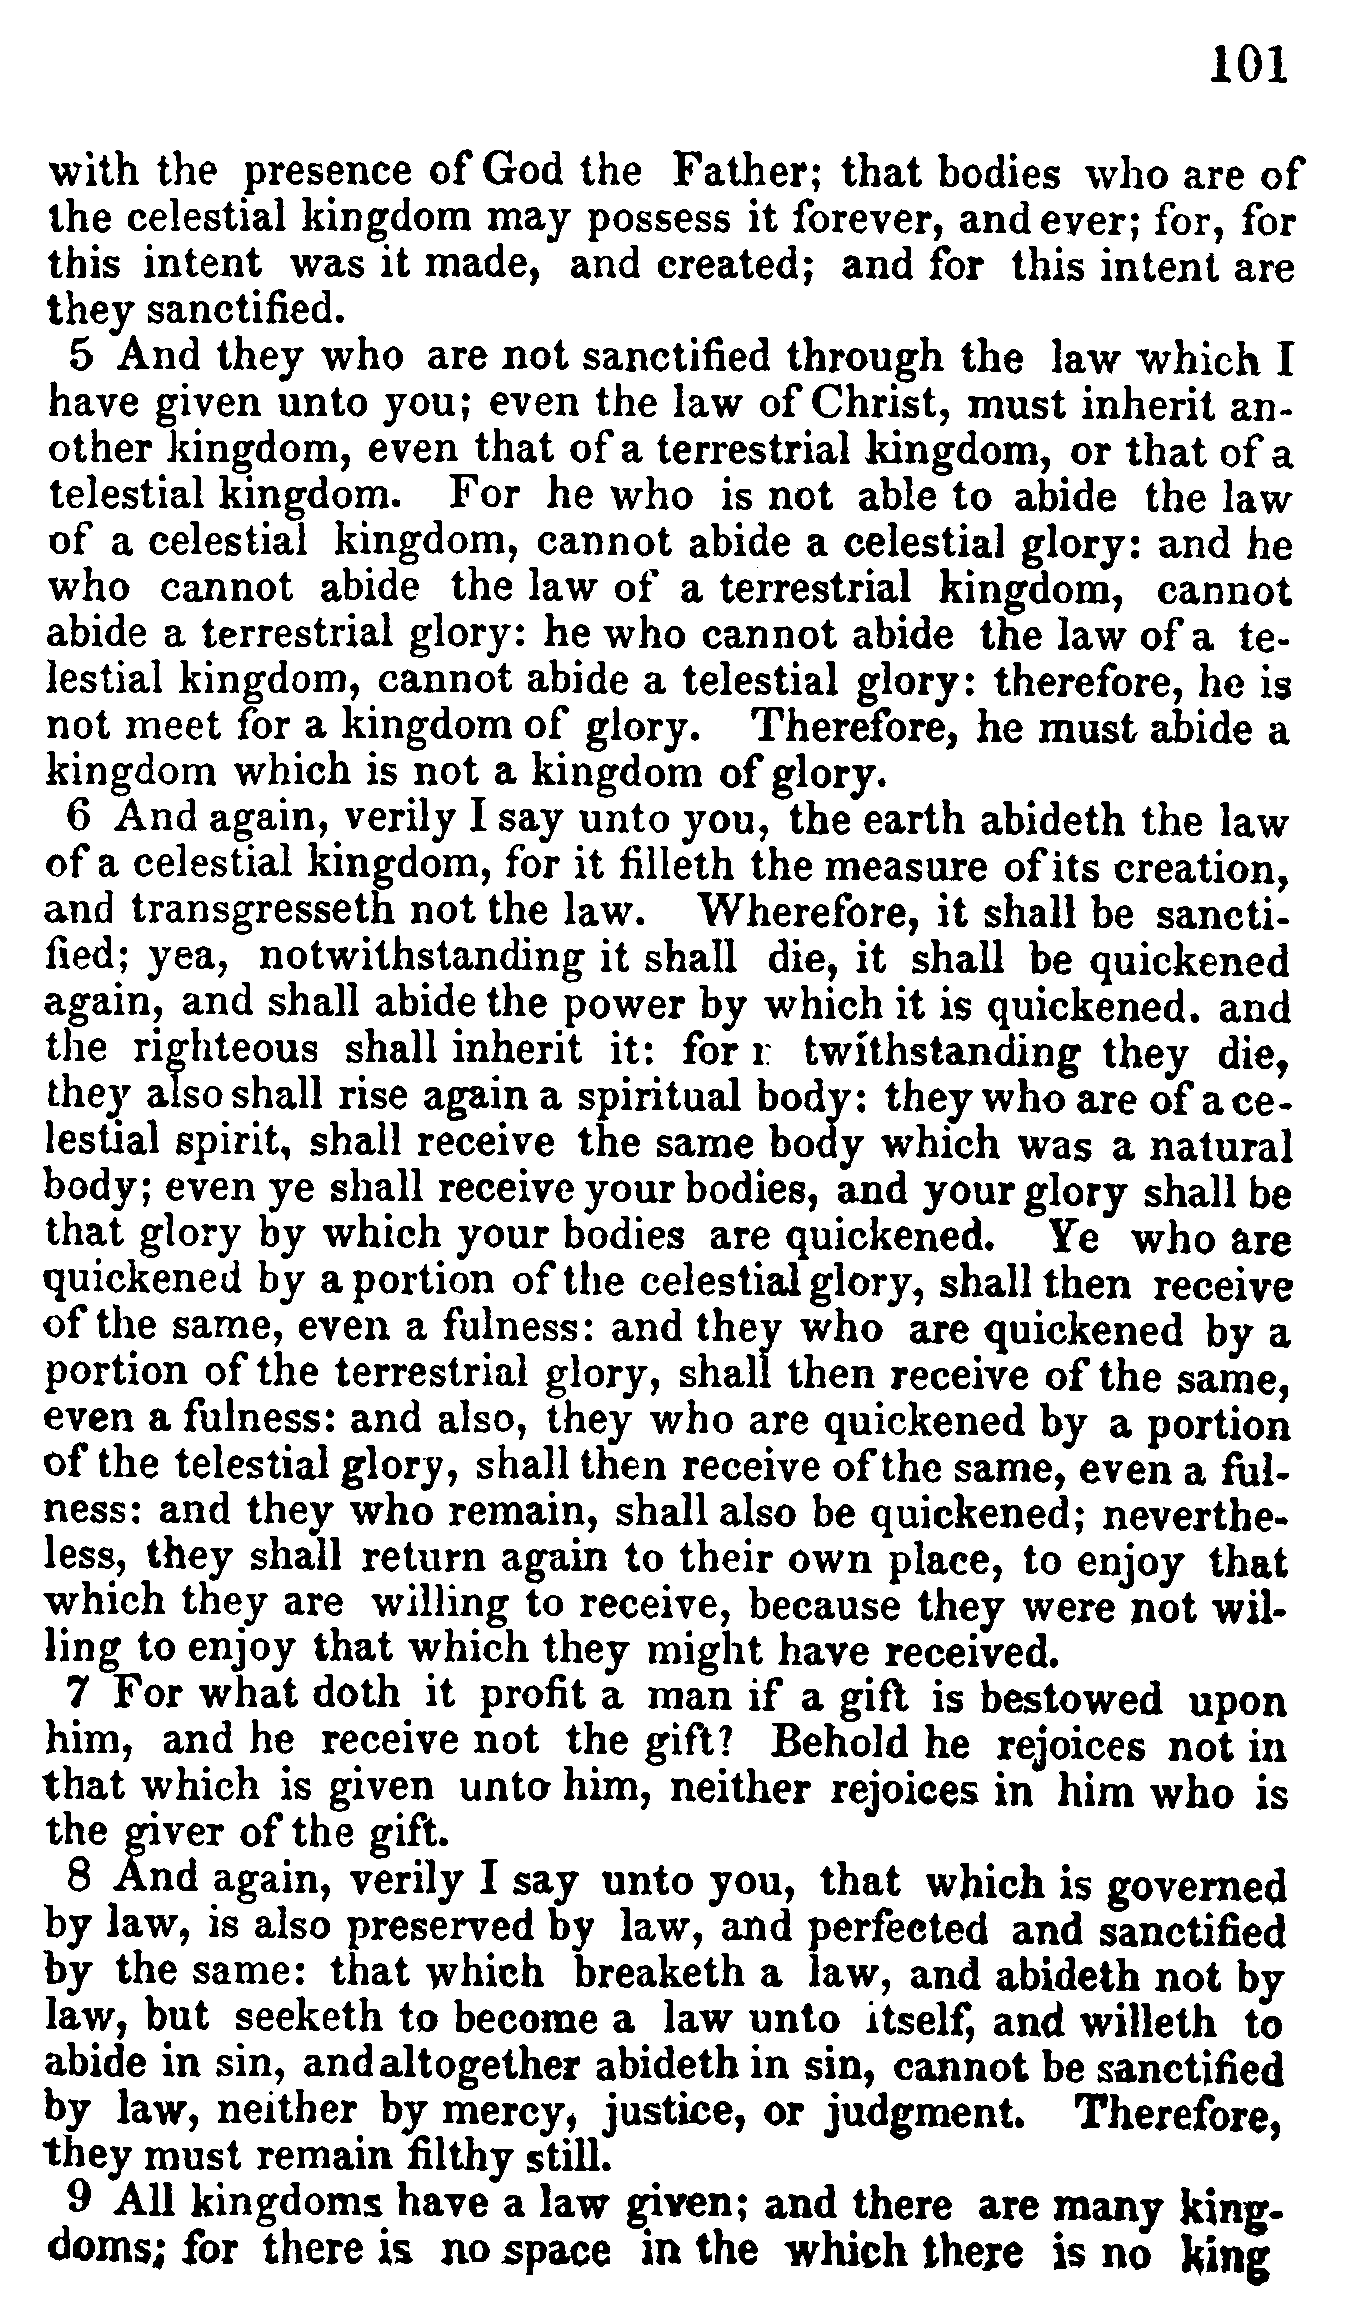 Doctrine and Covenants 1835 edition p.101